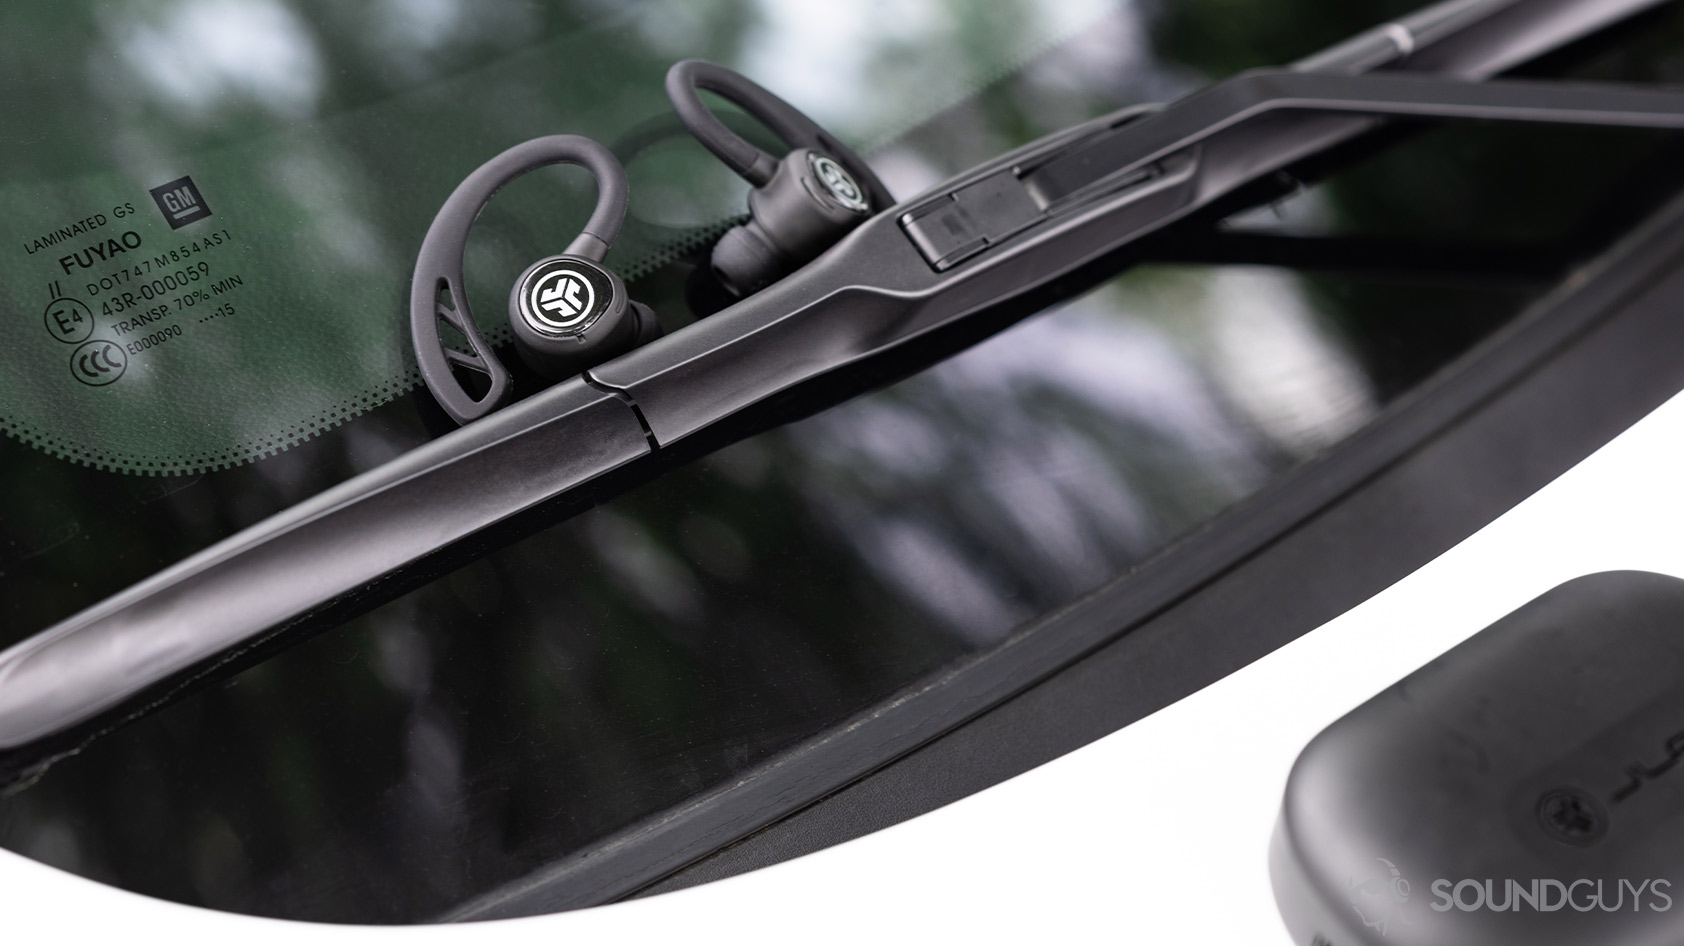 The JLab Epic Air Sport earbuds on a car's windshield wipers.